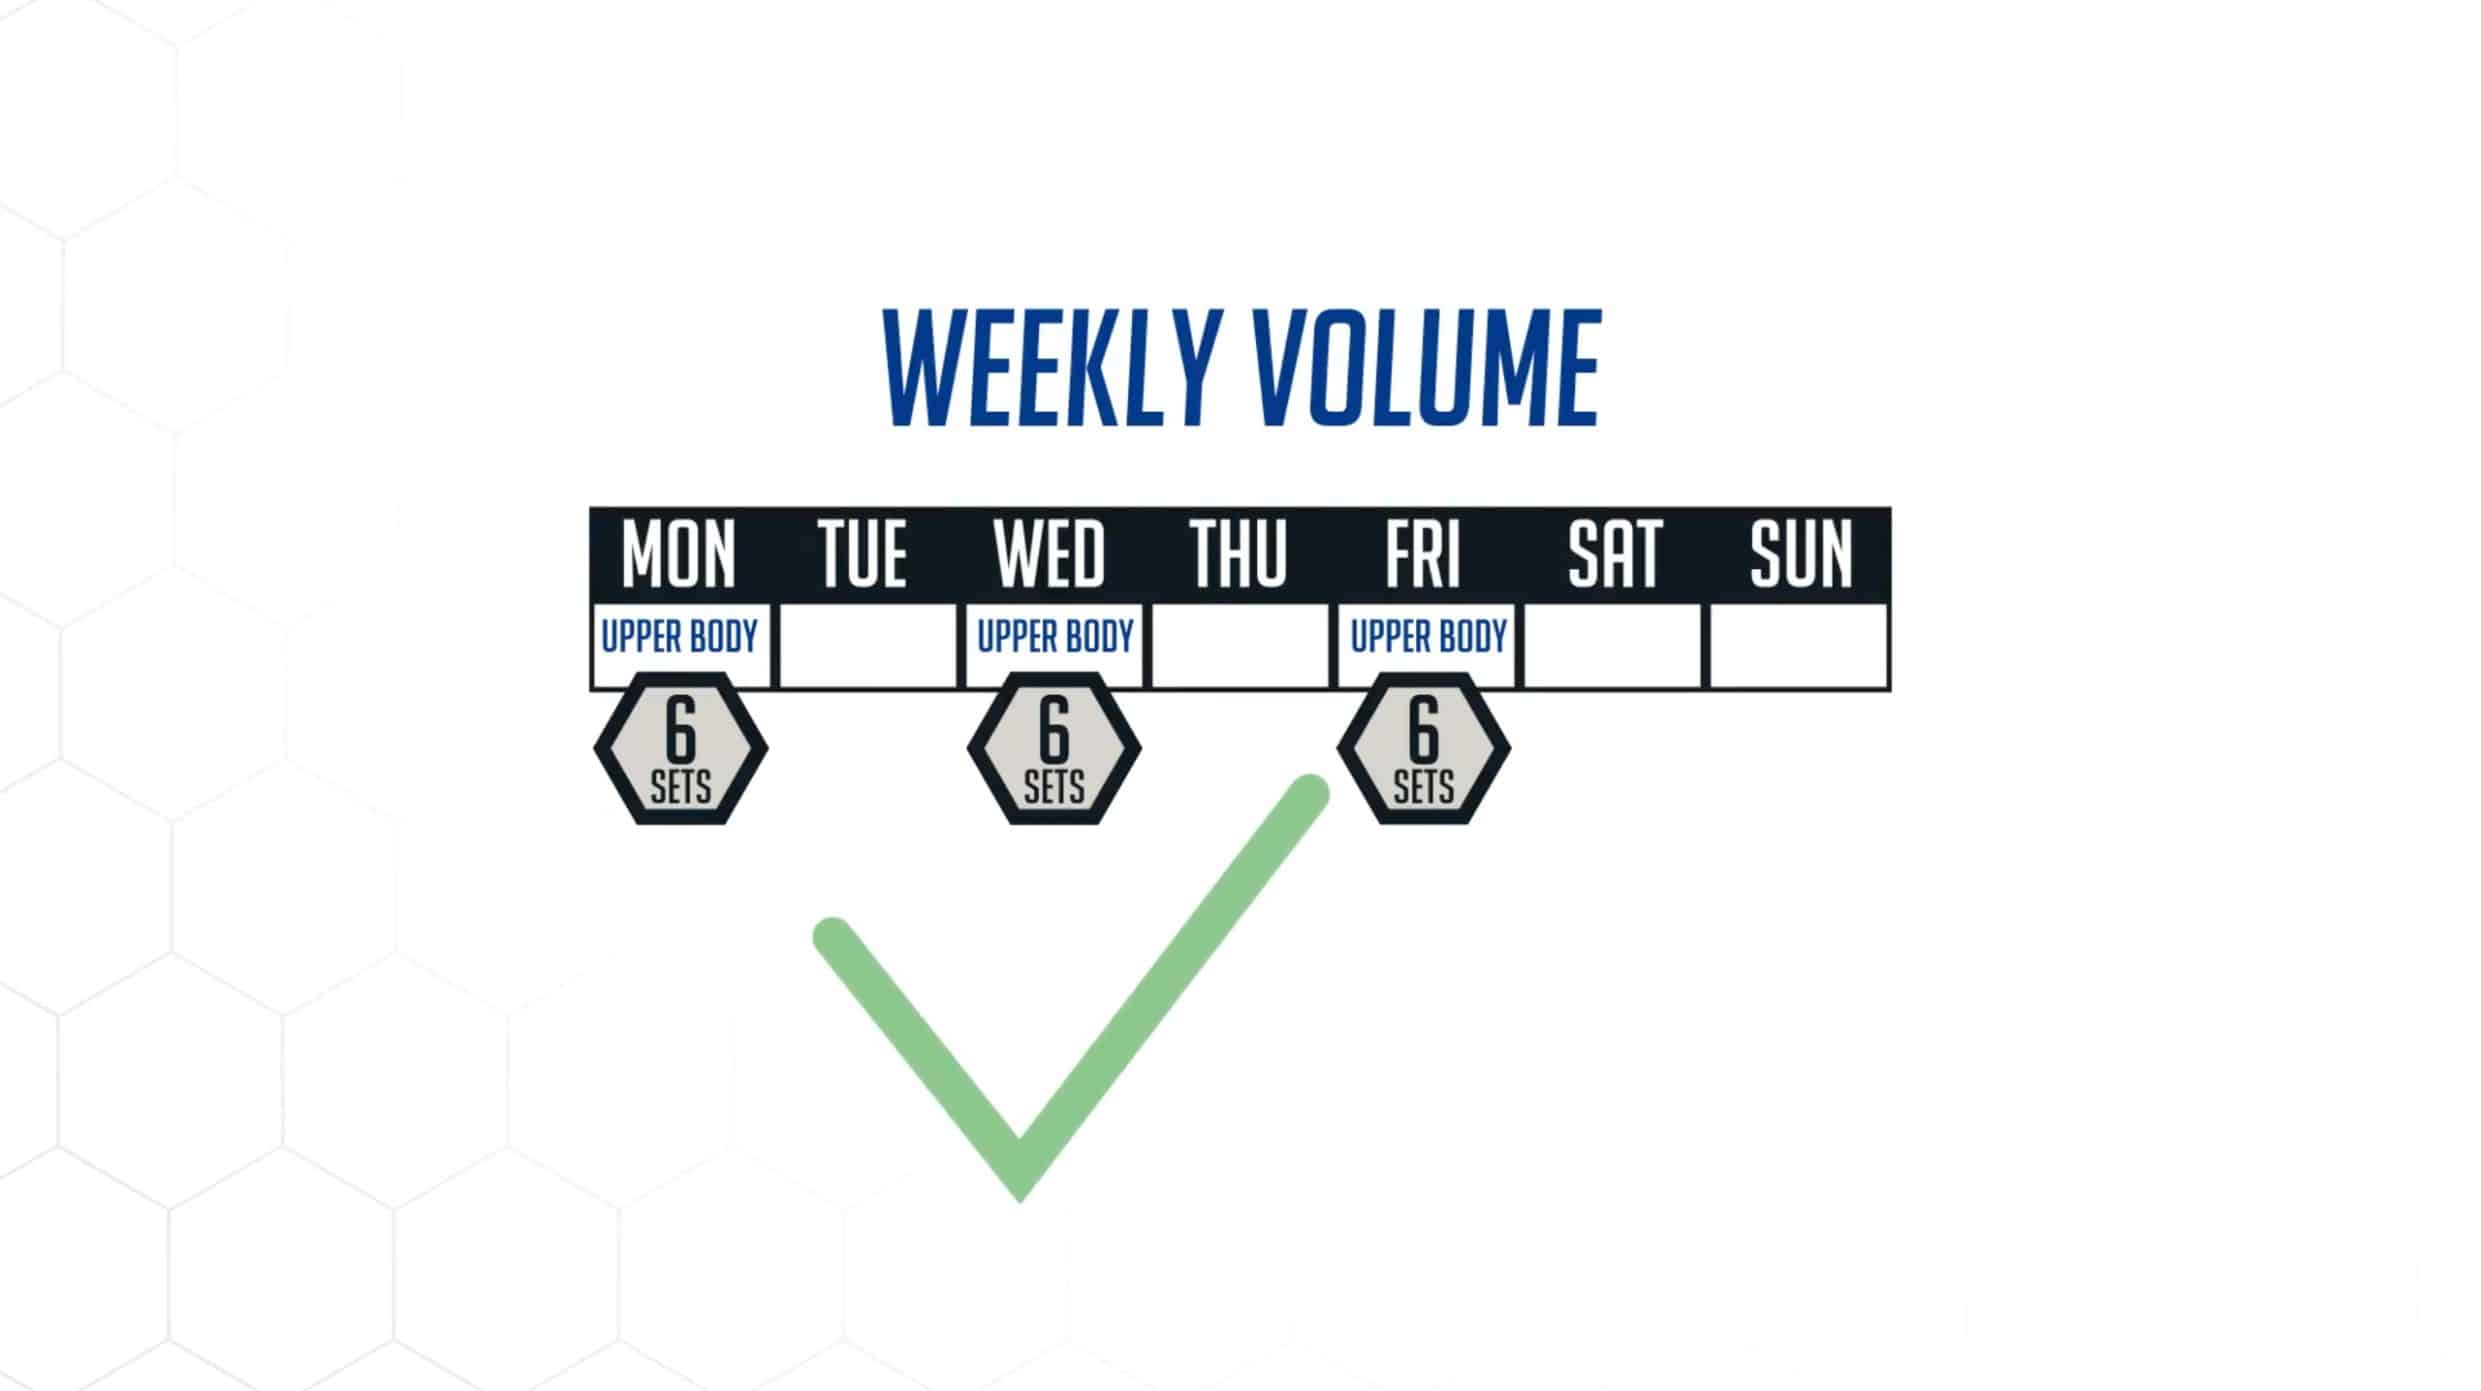 Spread out your weekly training volume for better muscle growth